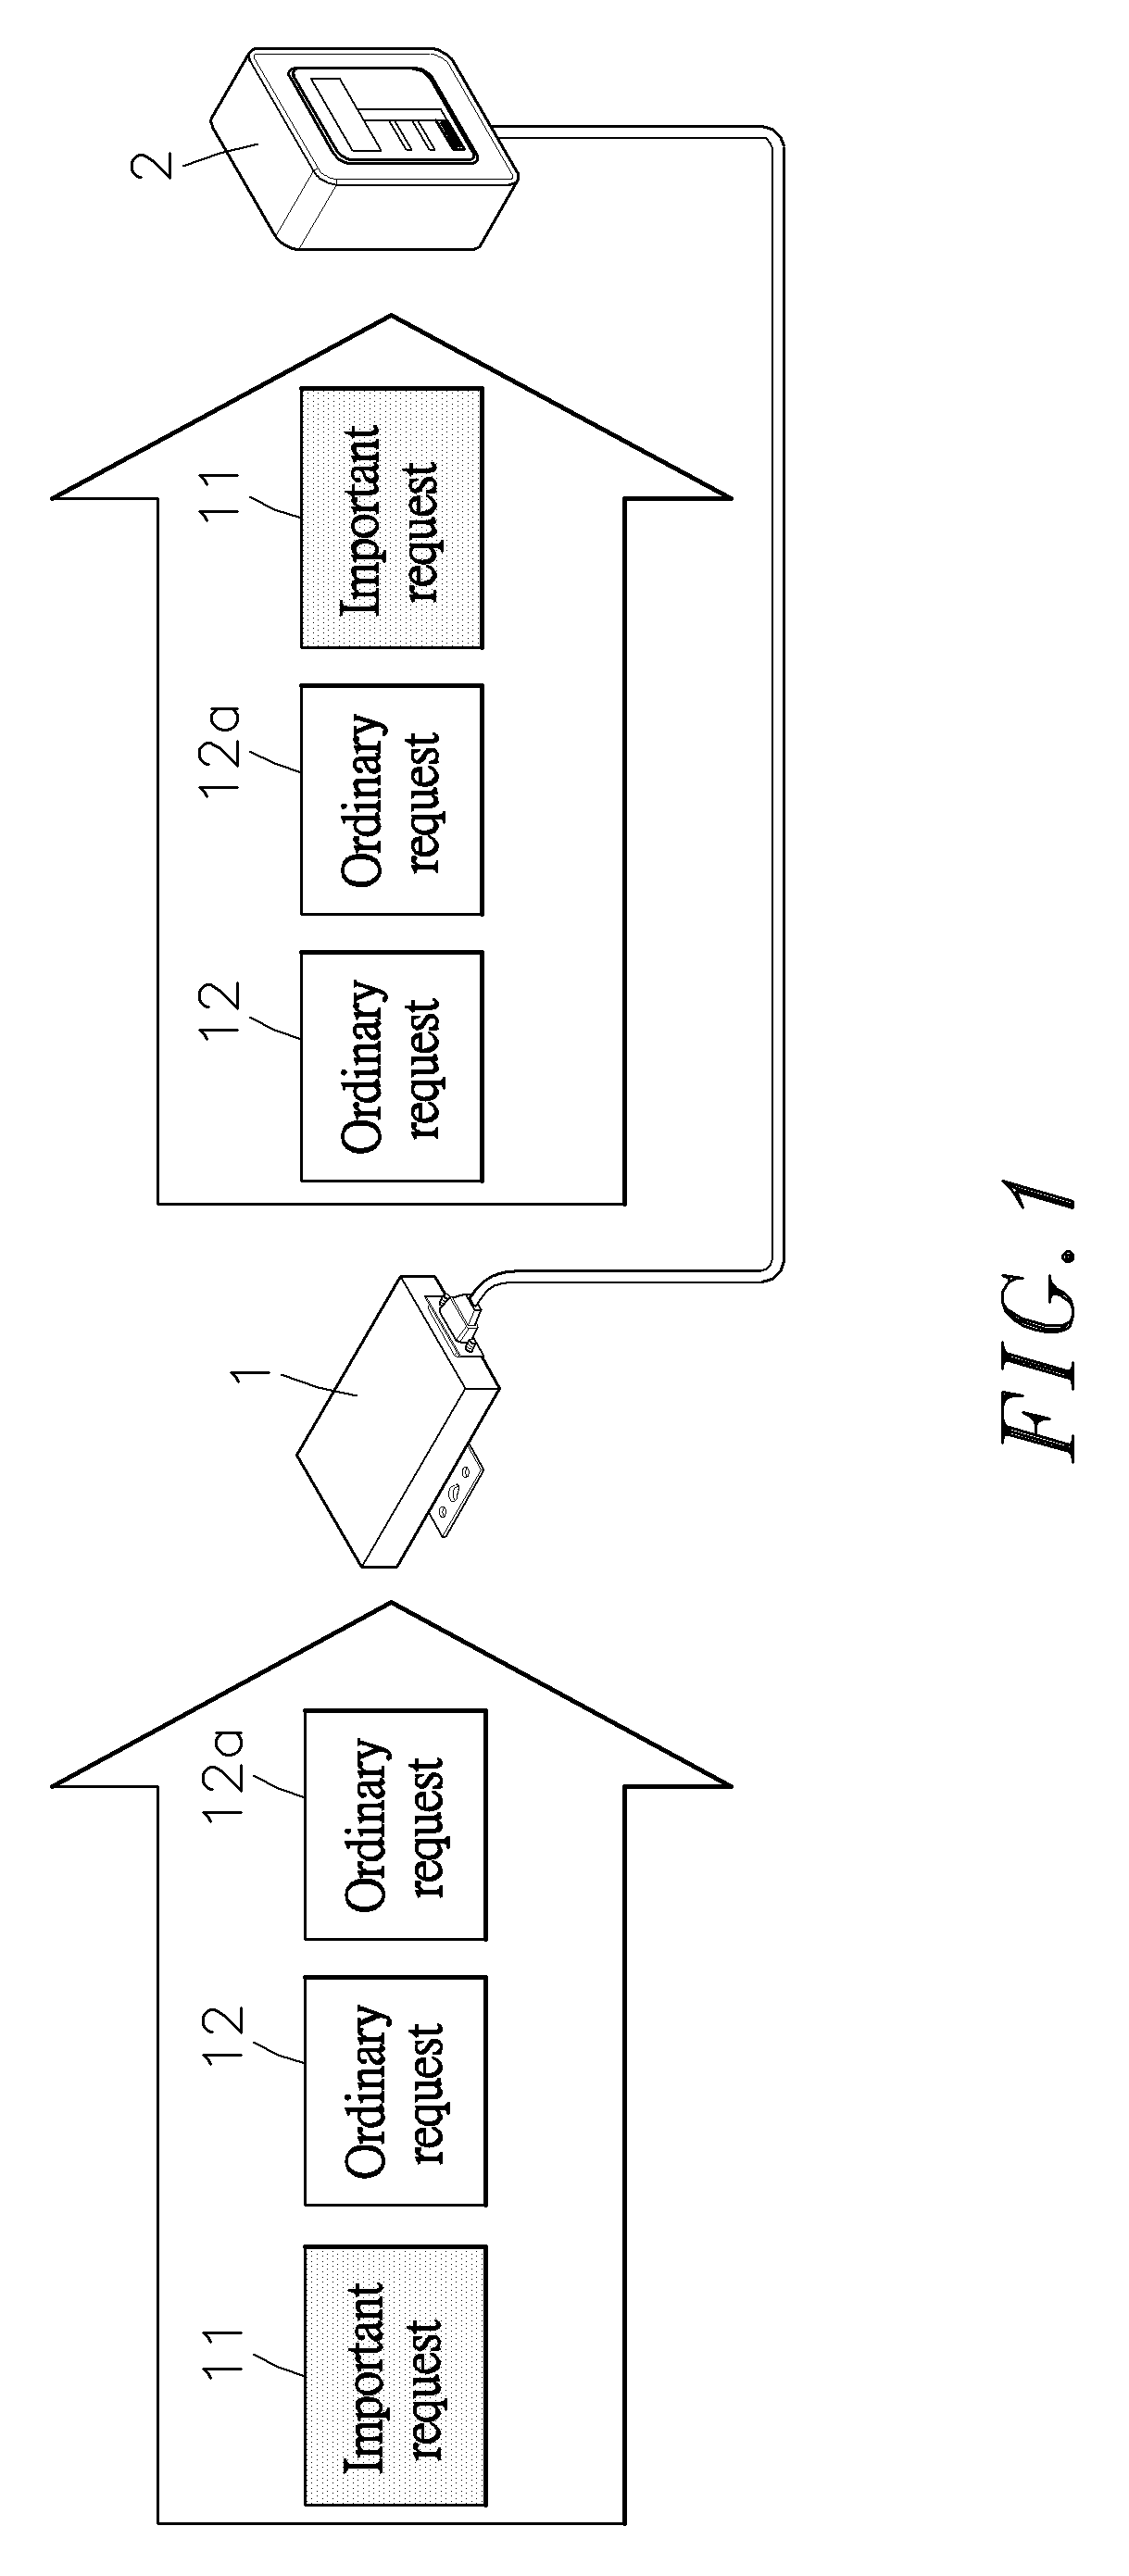 Method of determing request transmission priority subject to request channel and transtting request subject to such request transmission priority in application of fieldbus communication framework